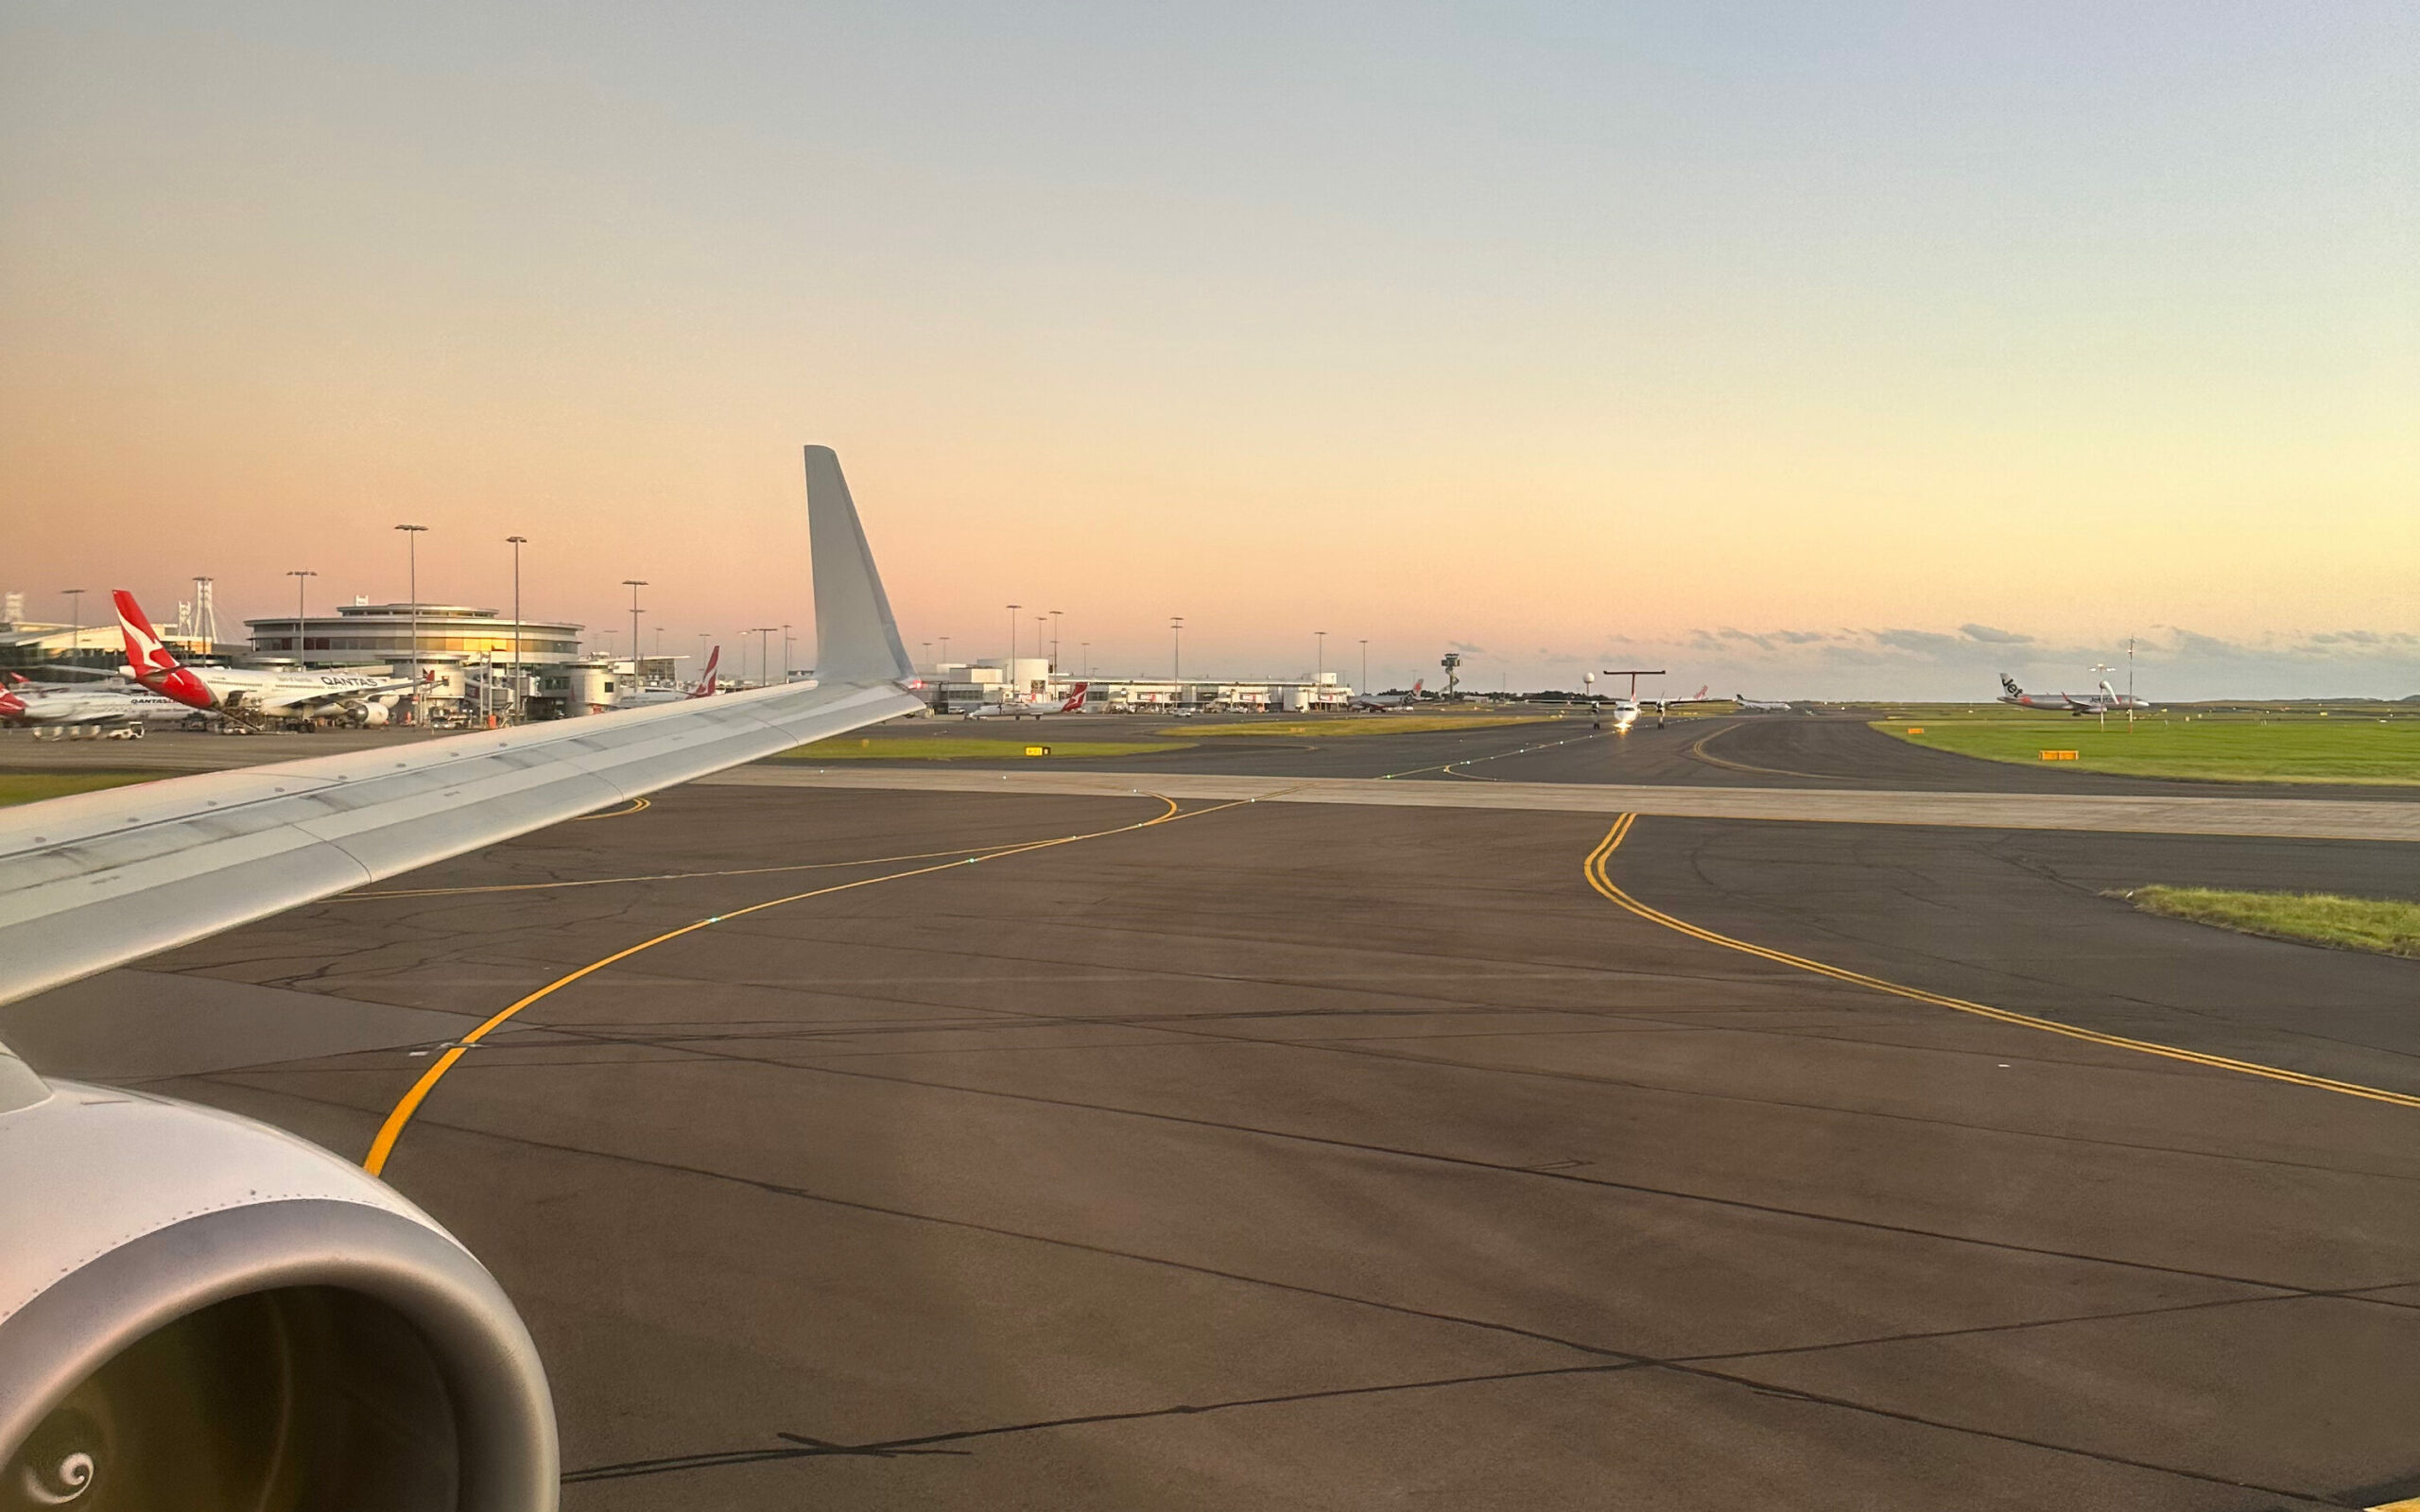 Sunset view from airplane of Sydney International Airport, with Qantas tailfin on a parked aircraft.